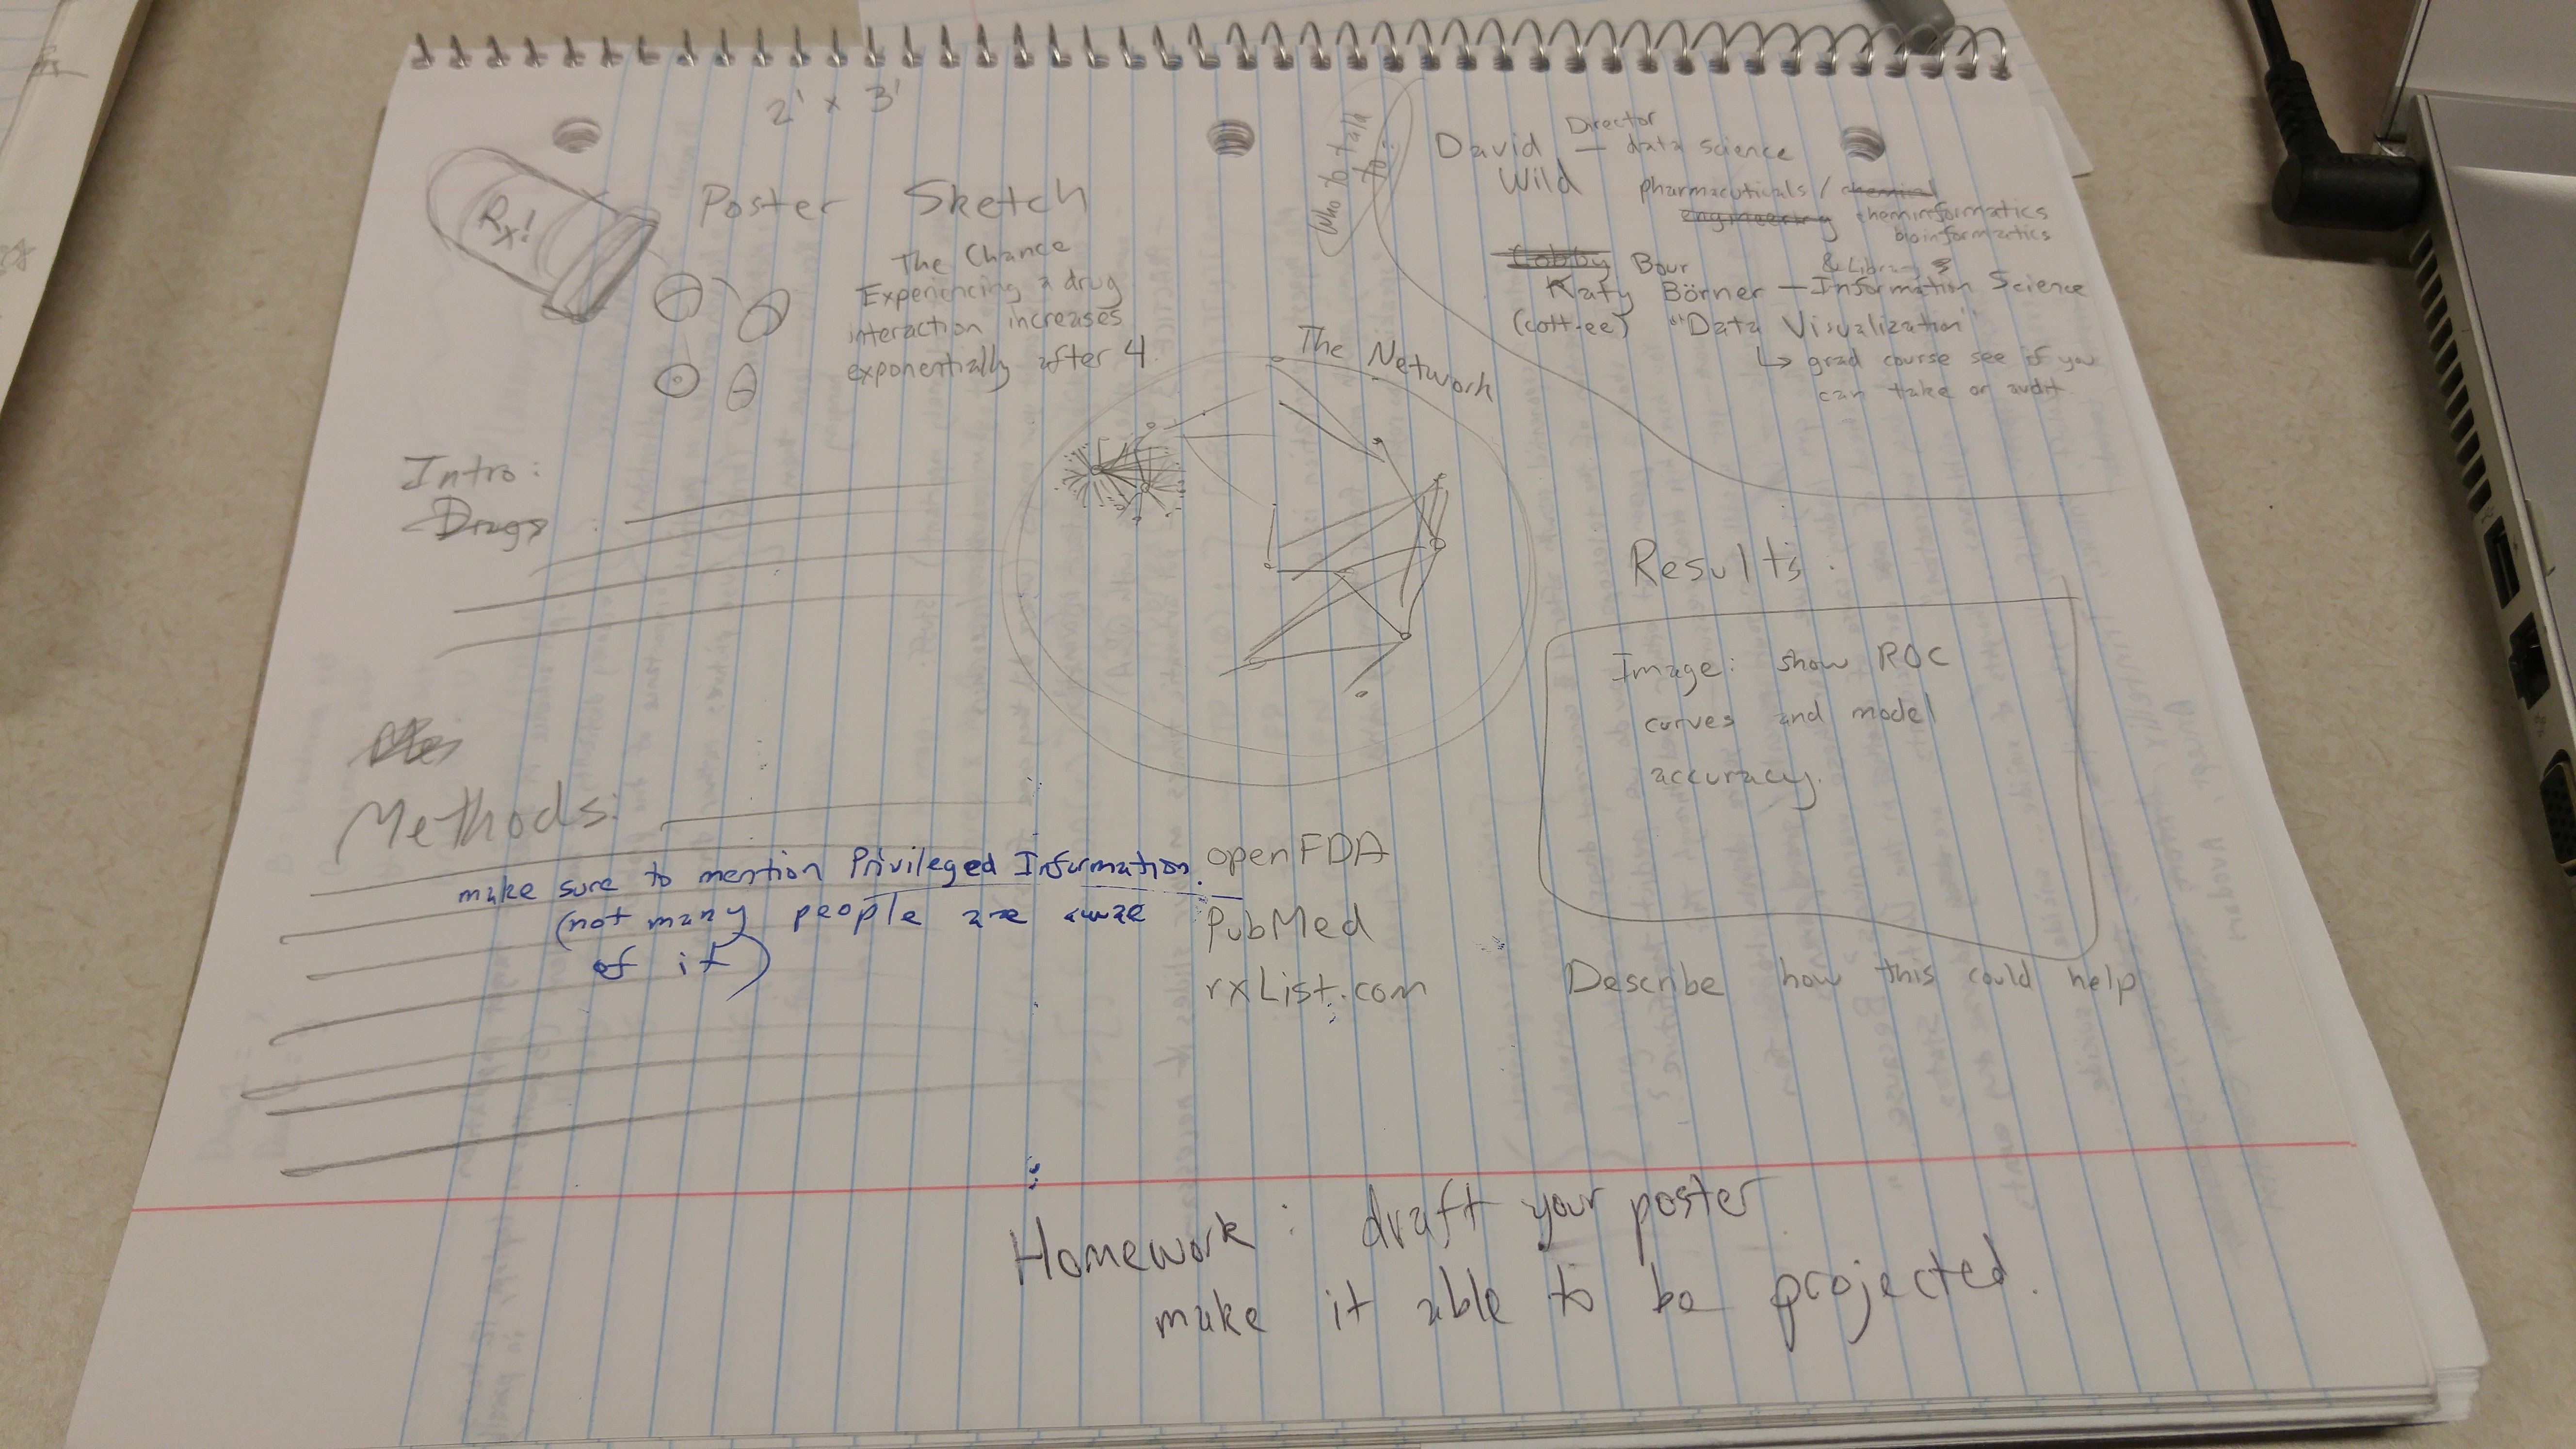 Landscape sketch of a research poster in a spiral notebook. Sections for 'Intro,' 'Methods,' and 'Results' are highlighted. The bottom of the poster mentions: Draft your poster, make it able to be projected.